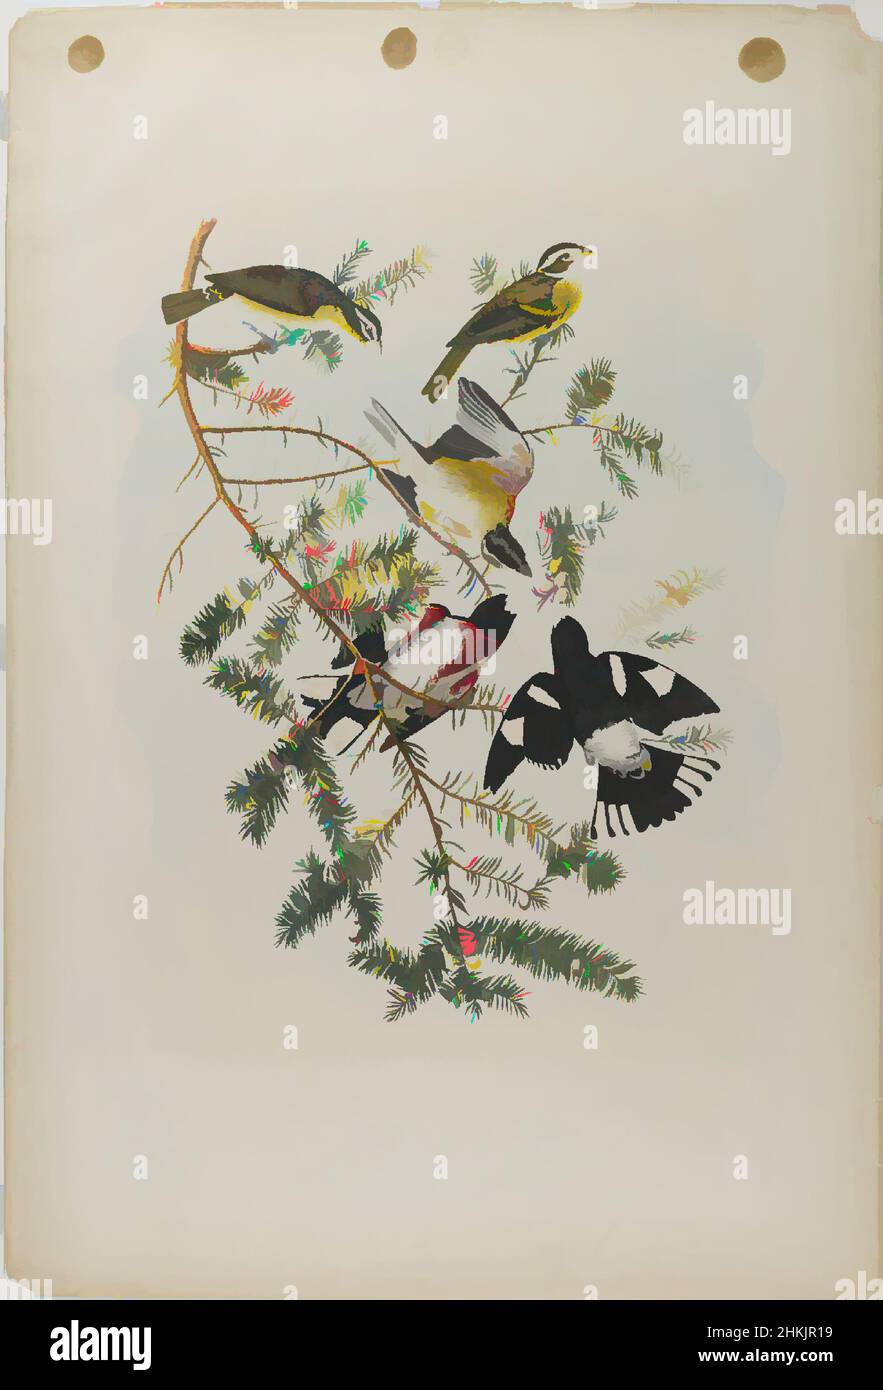 Art inspired by Rose-breasted Grosbeak, John James Audubon, American, born Haiti, 1785-1851, Chromolithograph, 1861, 40 x 27 1/8 in., 101.6 x 68.9 cm, birds, branches, fauna, flora, Fringilla ludoviciana, ground hemlock, natural history, nature study, ornithology, Taxus canadensis, Classic works modernized by Artotop with a splash of modernity. Shapes, color and value, eye-catching visual impact on art. Emotions through freedom of artworks in a contemporary way. A timeless message pursuing a wildly creative new direction. Artists turning to the digital medium and creating the Artotop NFT Stock Photo